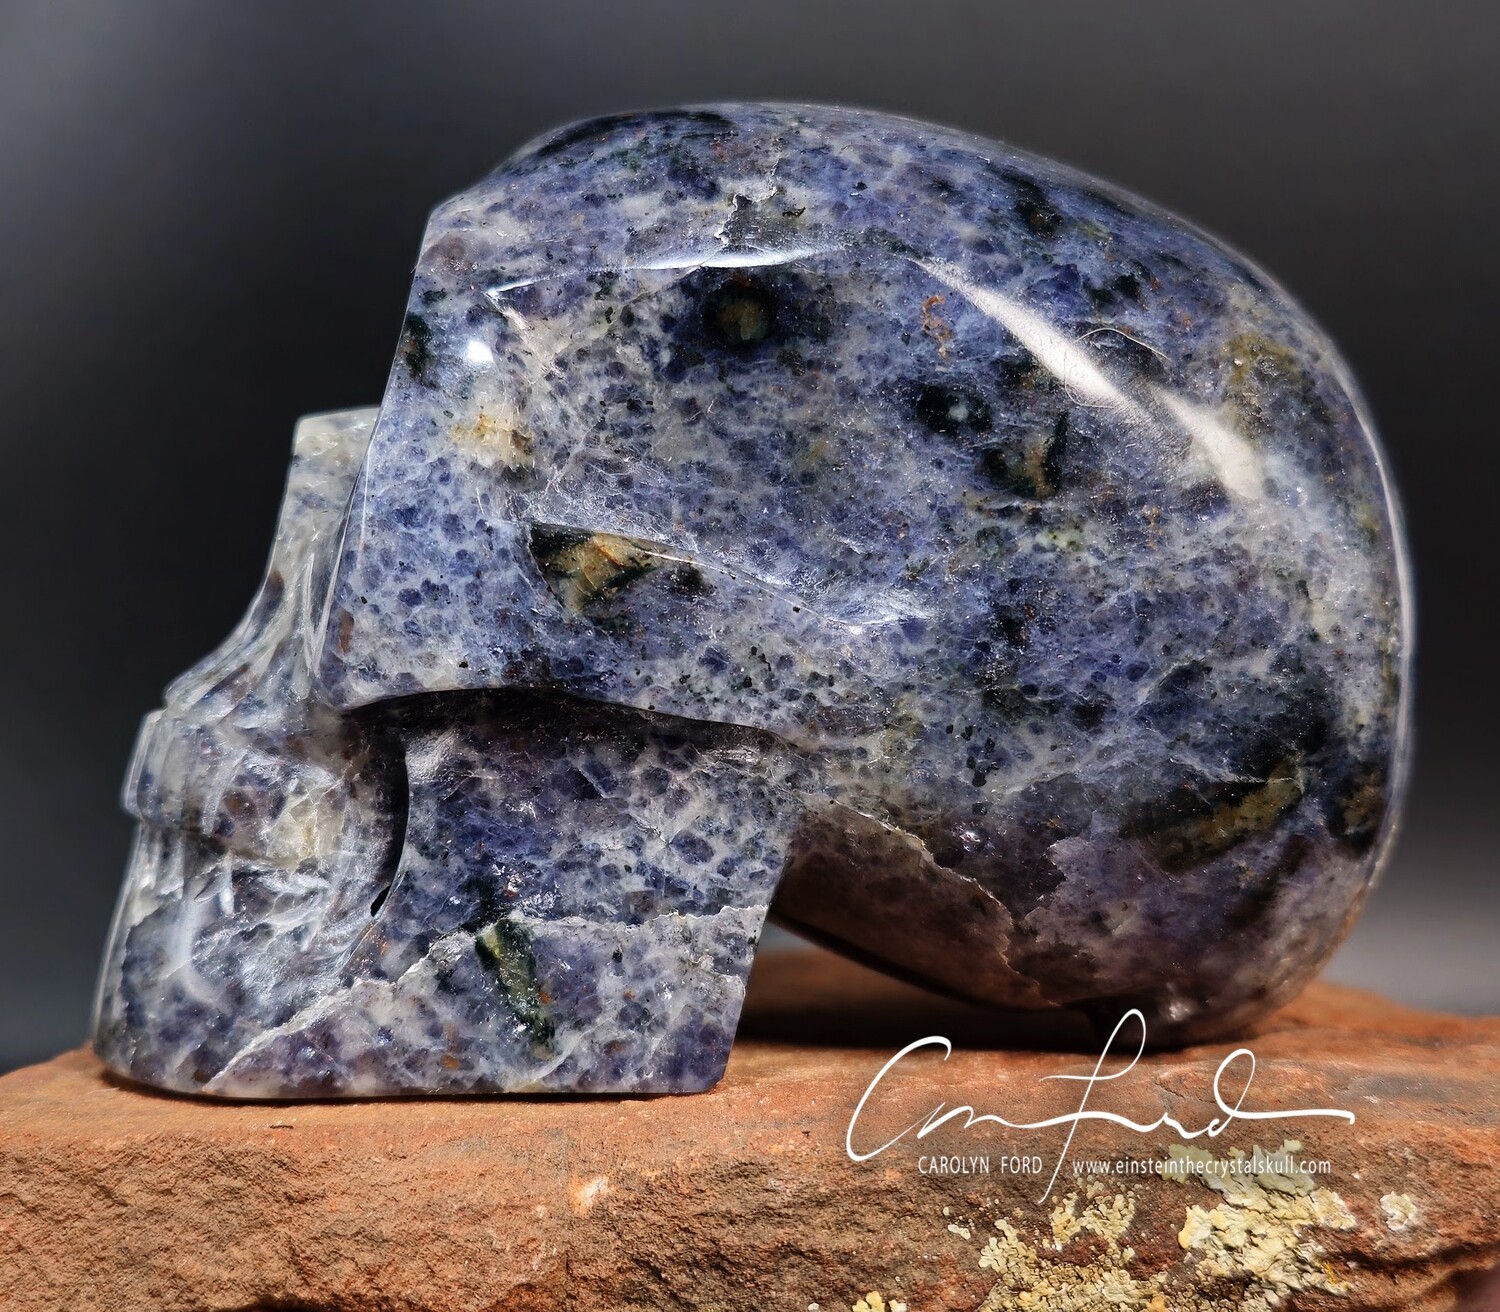 Iolite and Sunstone, Einstein the Ancient Crystal
Skull Imprinted, 